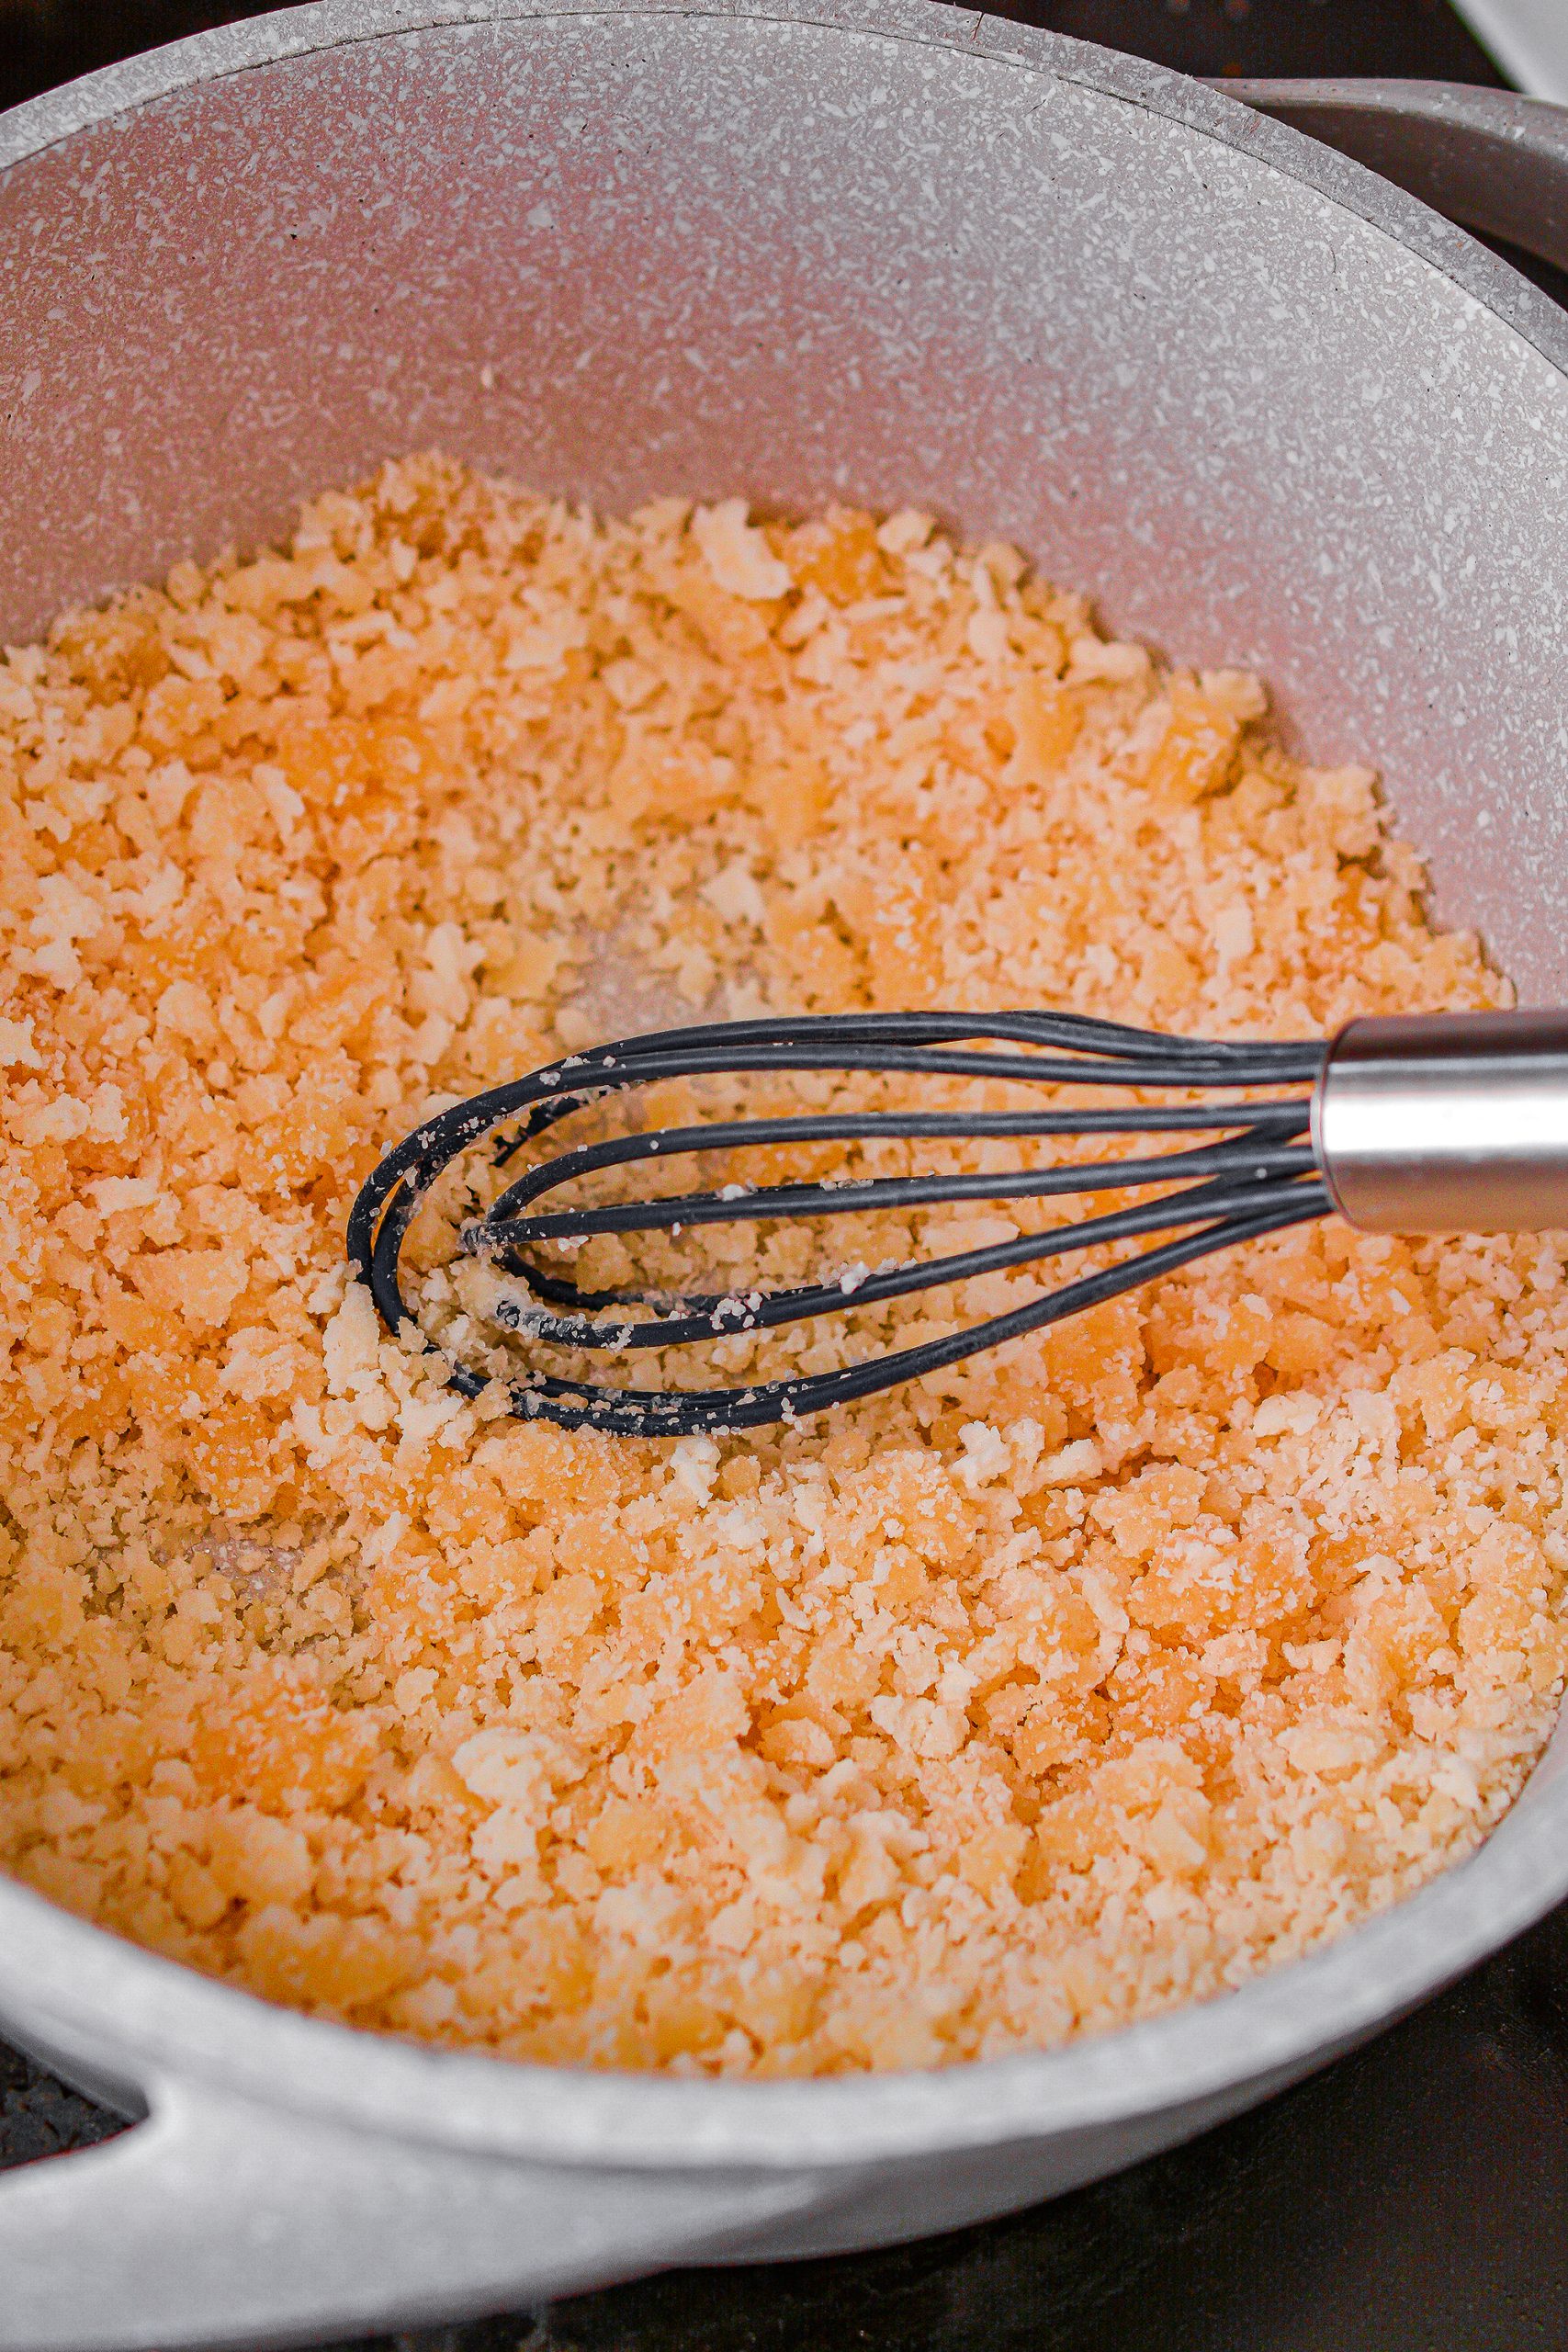 Heat the sugar in a saucepan over medium high heat on the stove while whisking often to prevent it from burning.